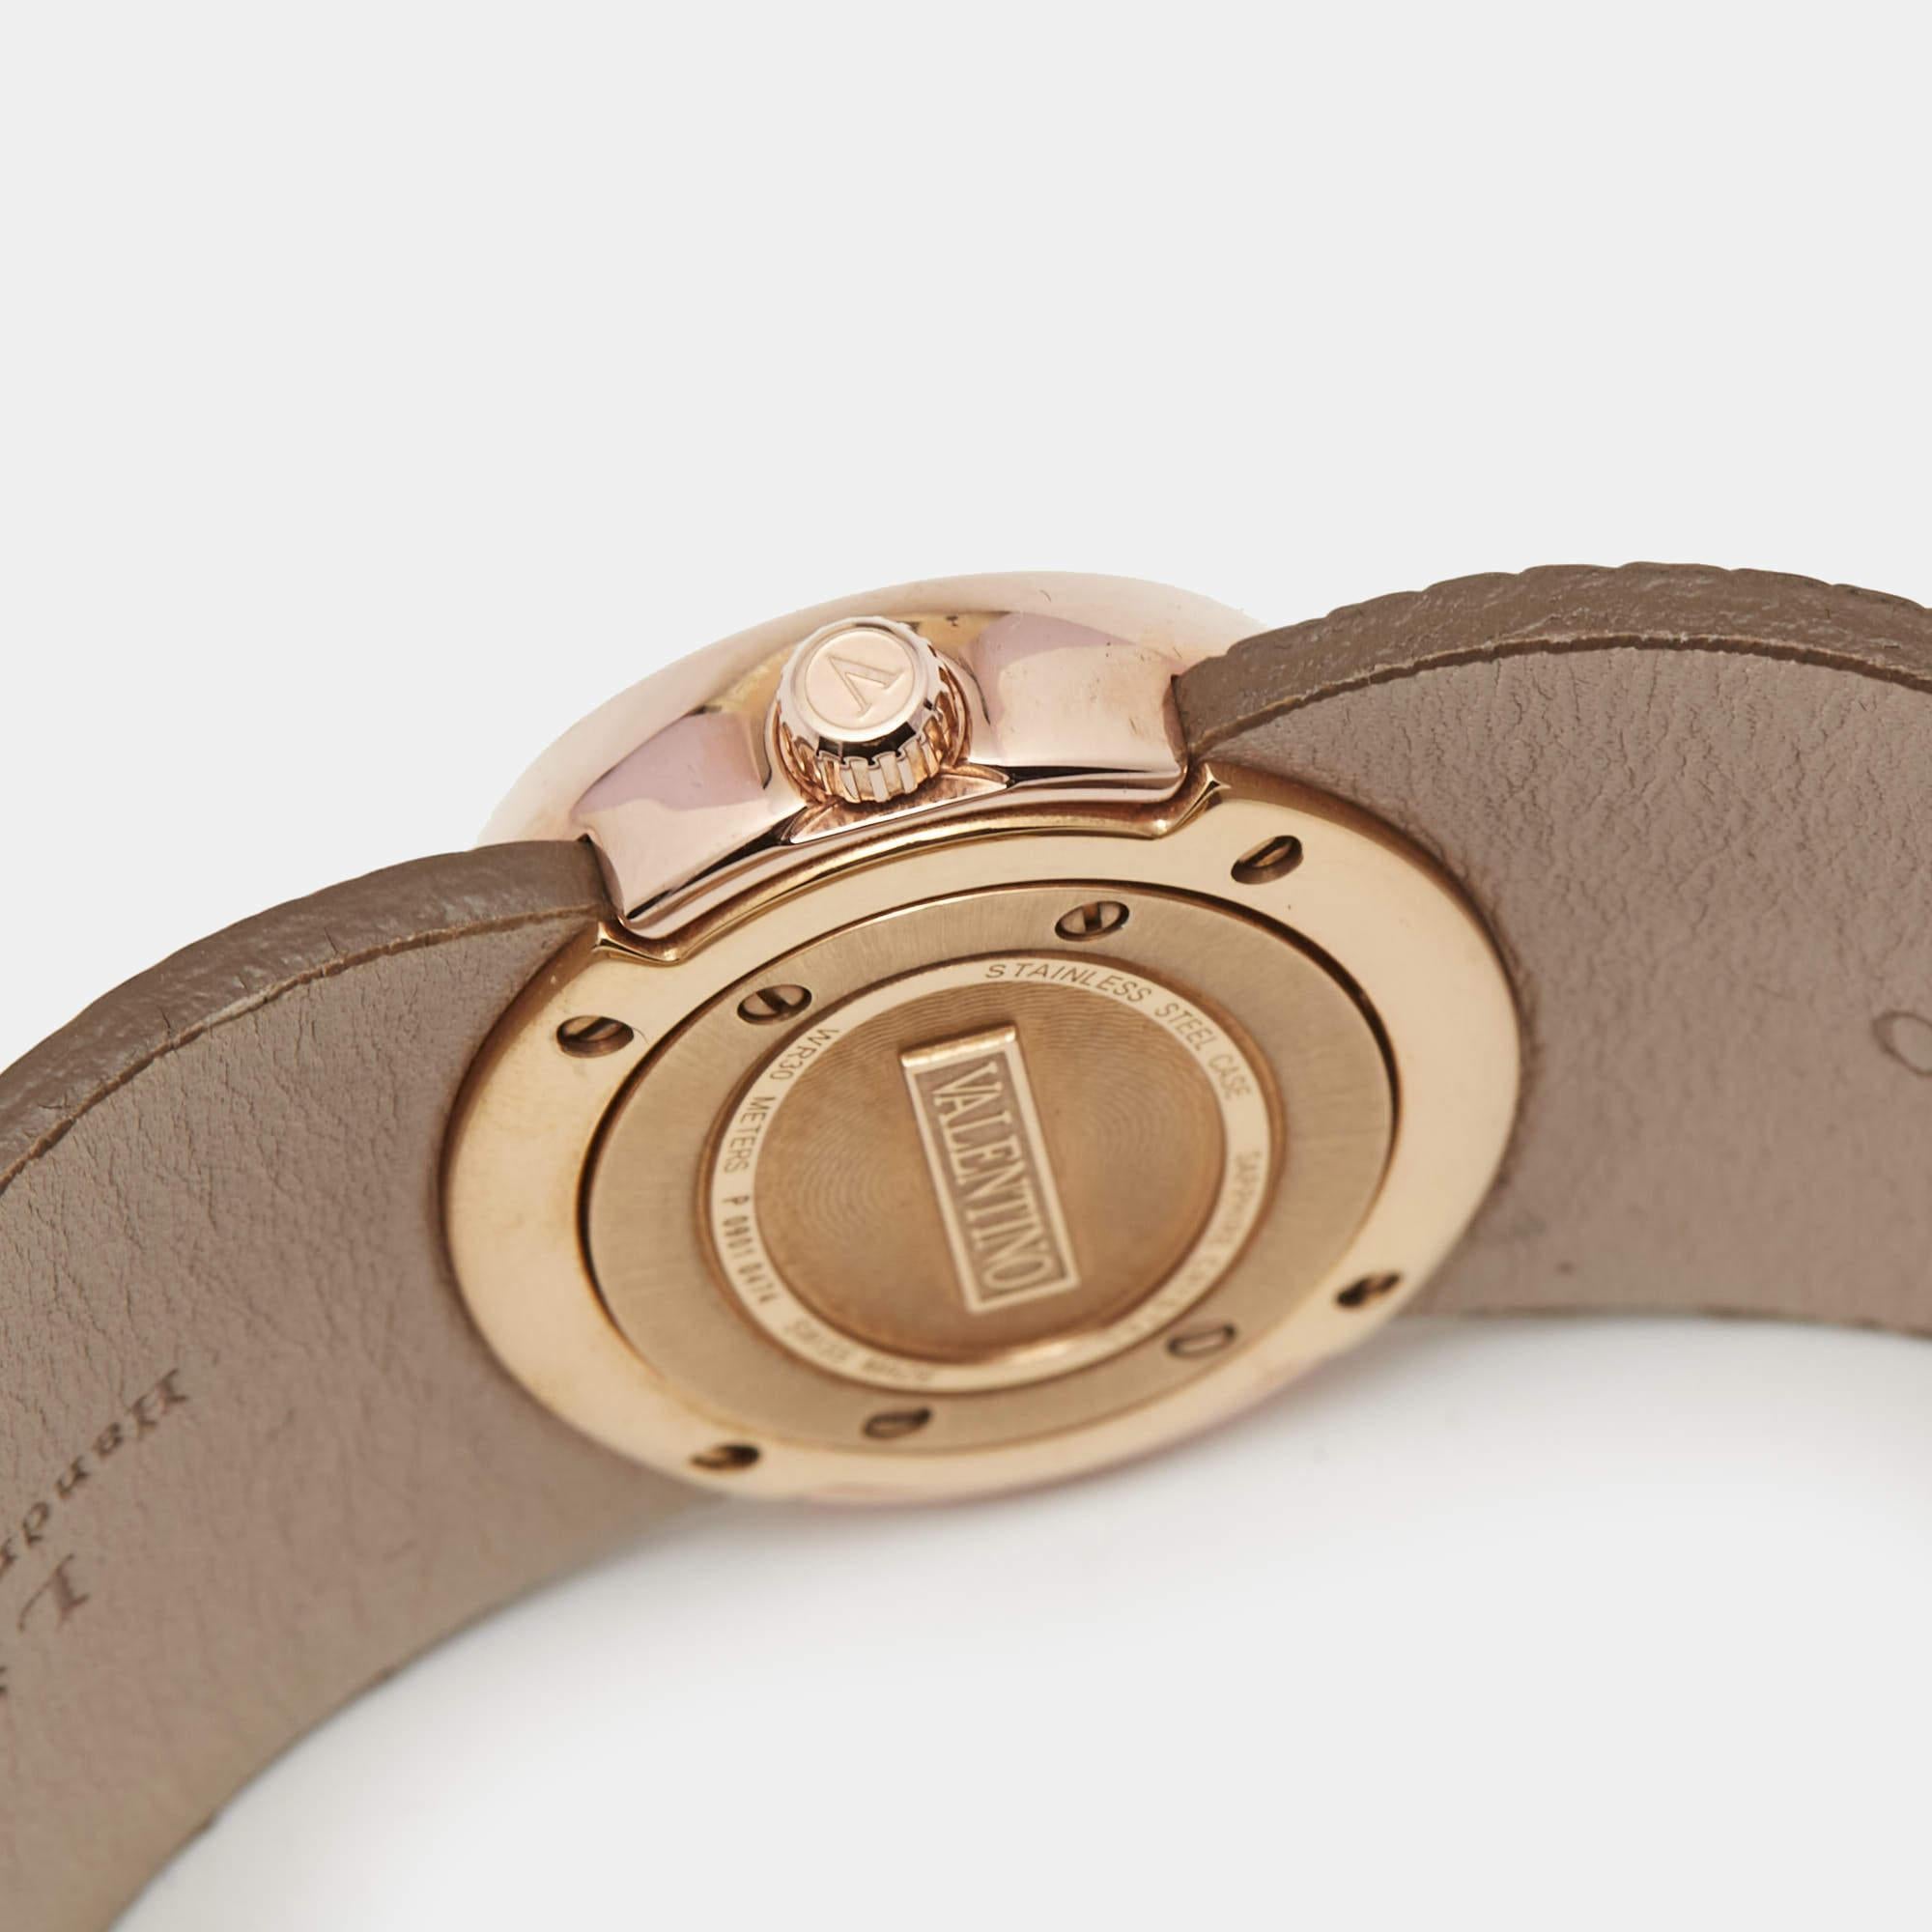 Your everyday style deserves the touch of luxury brought by this wristwatch from Valentino. Crafted from rose gold plated stainless steel, the designer watch has an oval case, a silver dial, and a comfortable bracelet.

